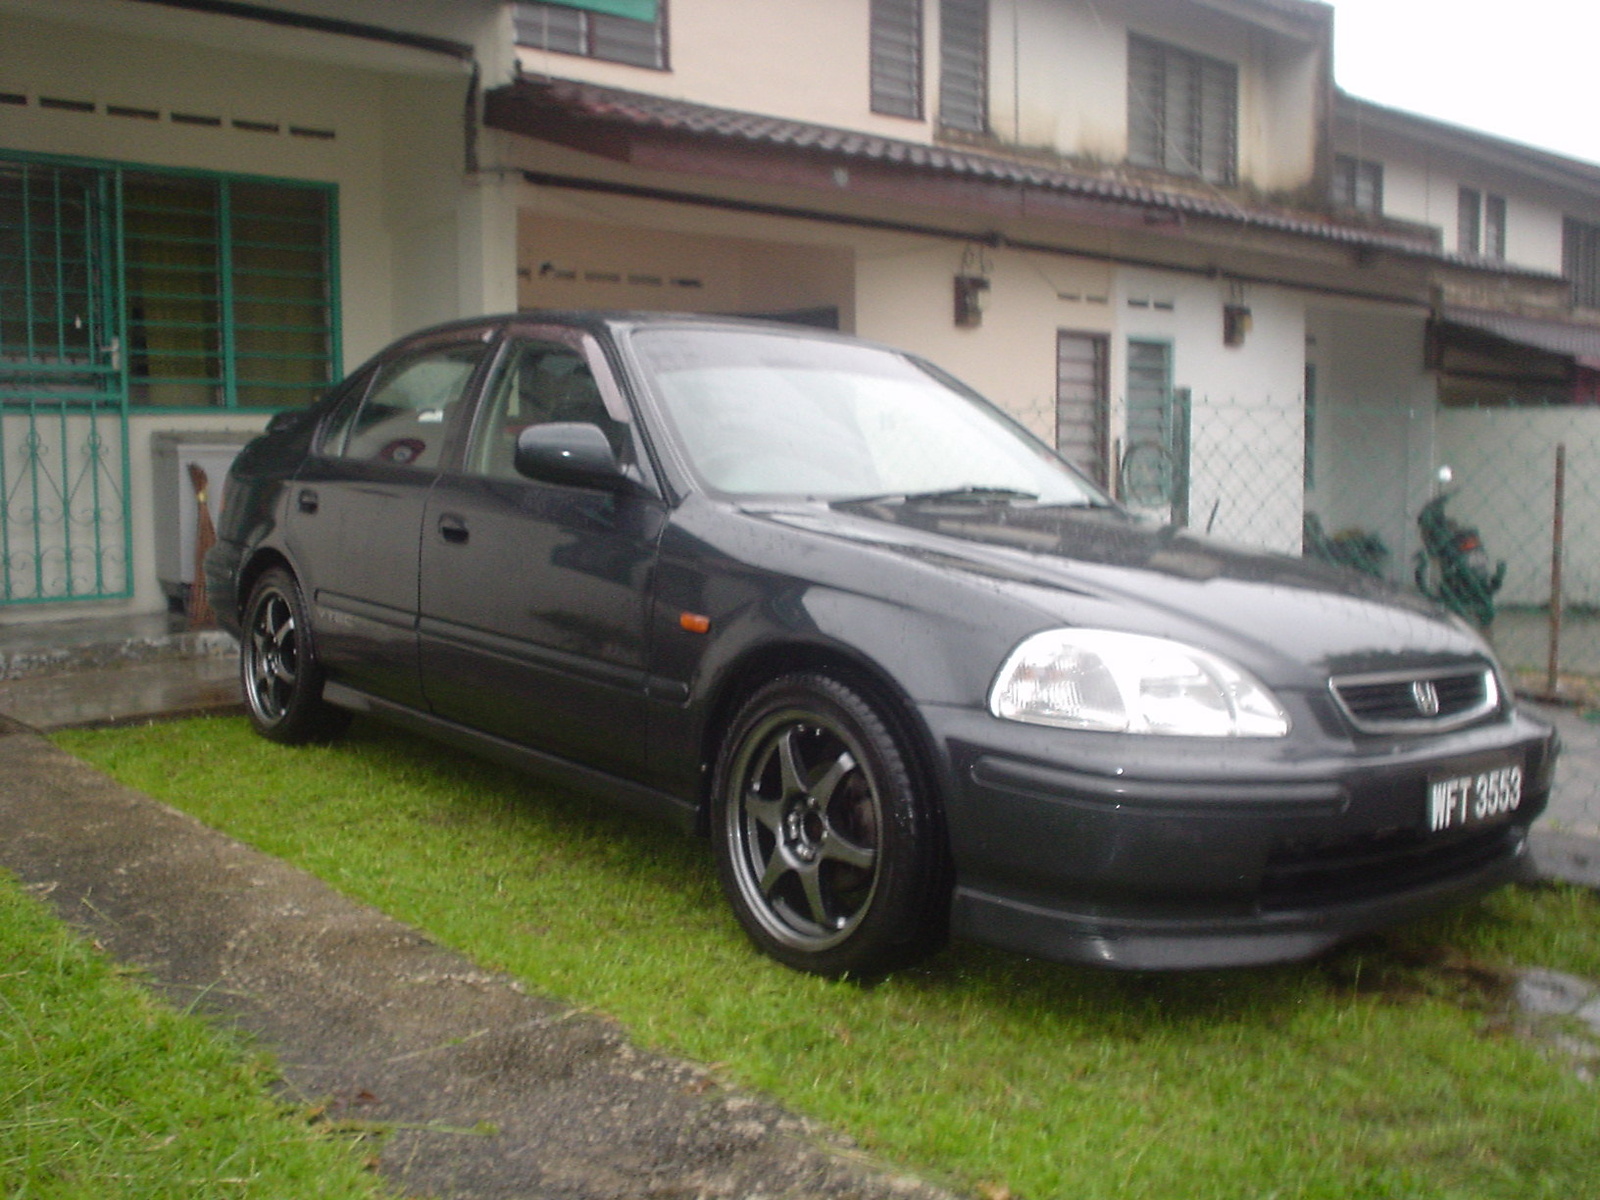 Specifications for 1997 honda civic #3